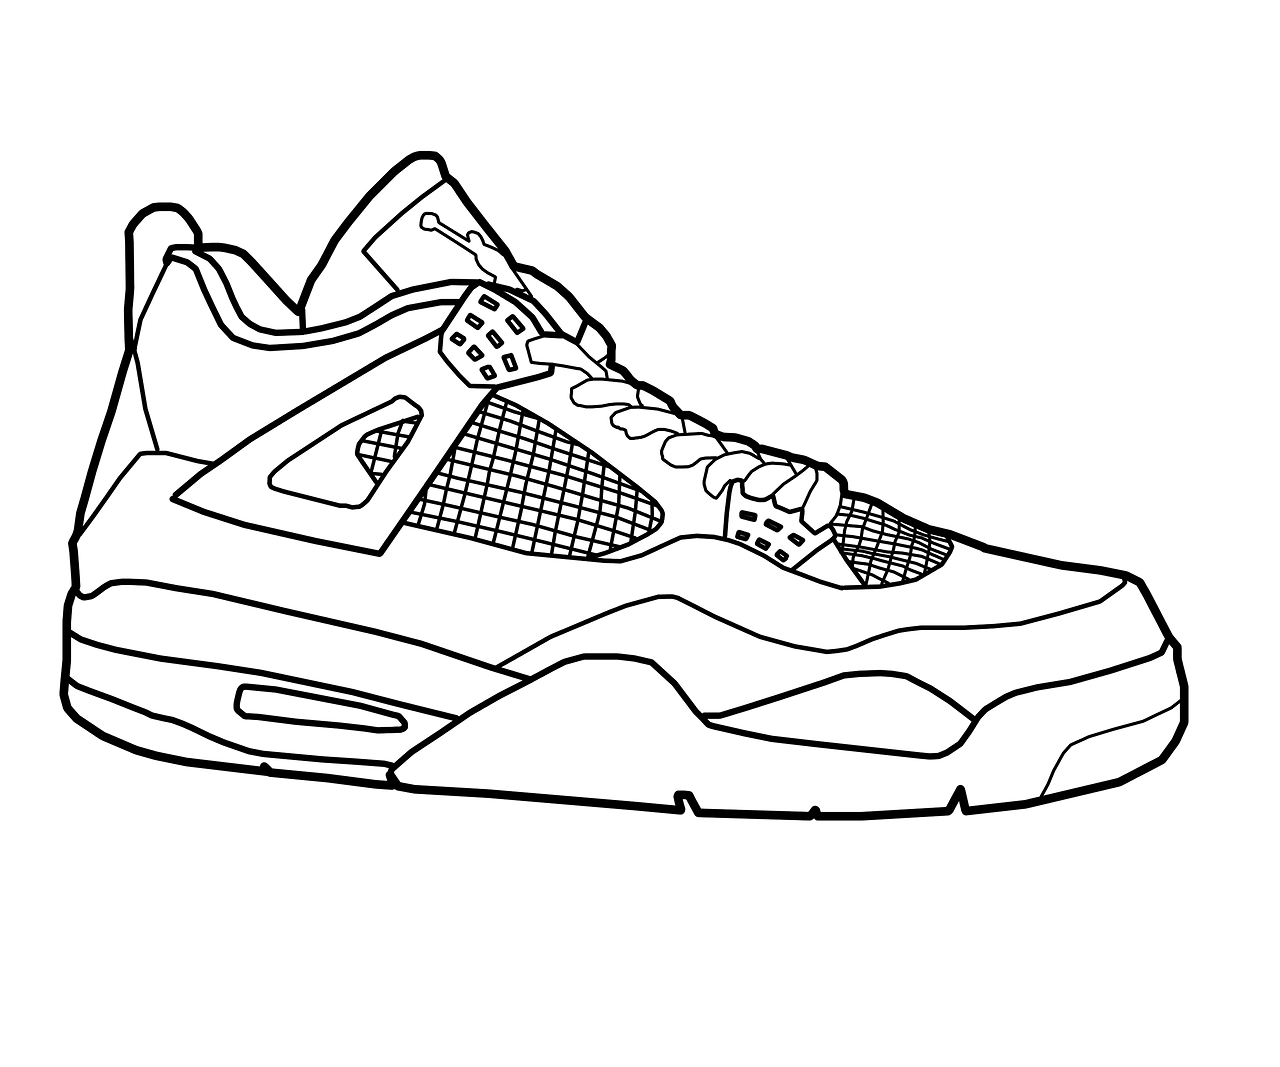 804 Animal Vans Shoes Coloring Pages with Animal character